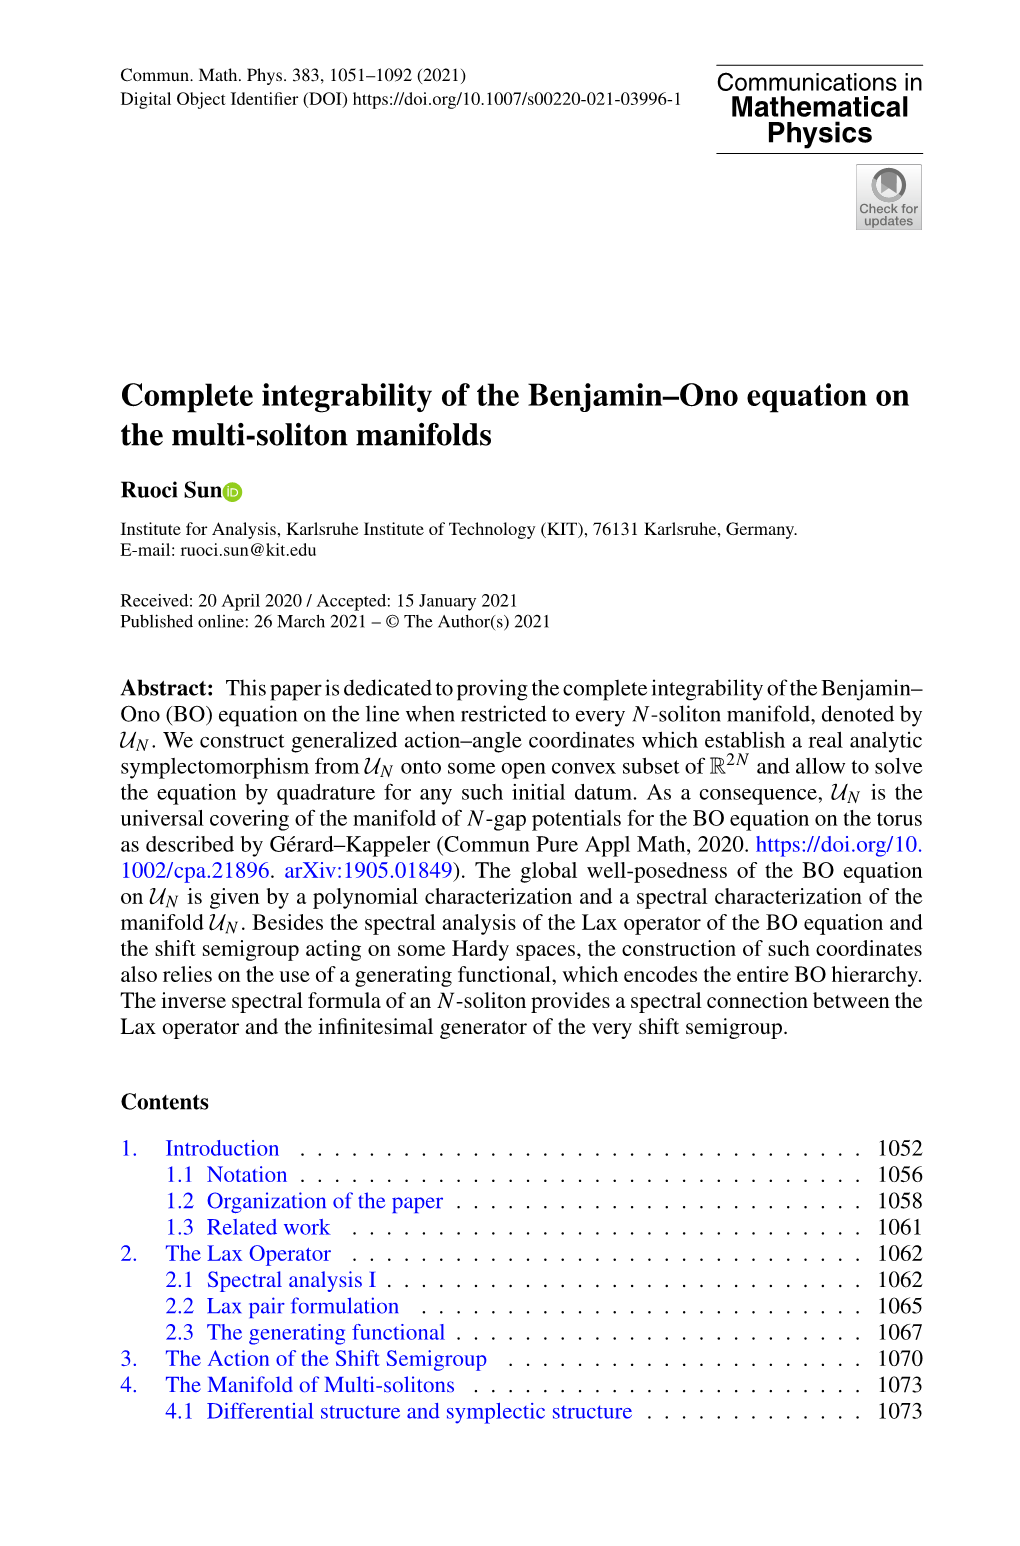 Complete Integrability of the Benjamin–Ono Equation on the Multi-Soliton Manifolds